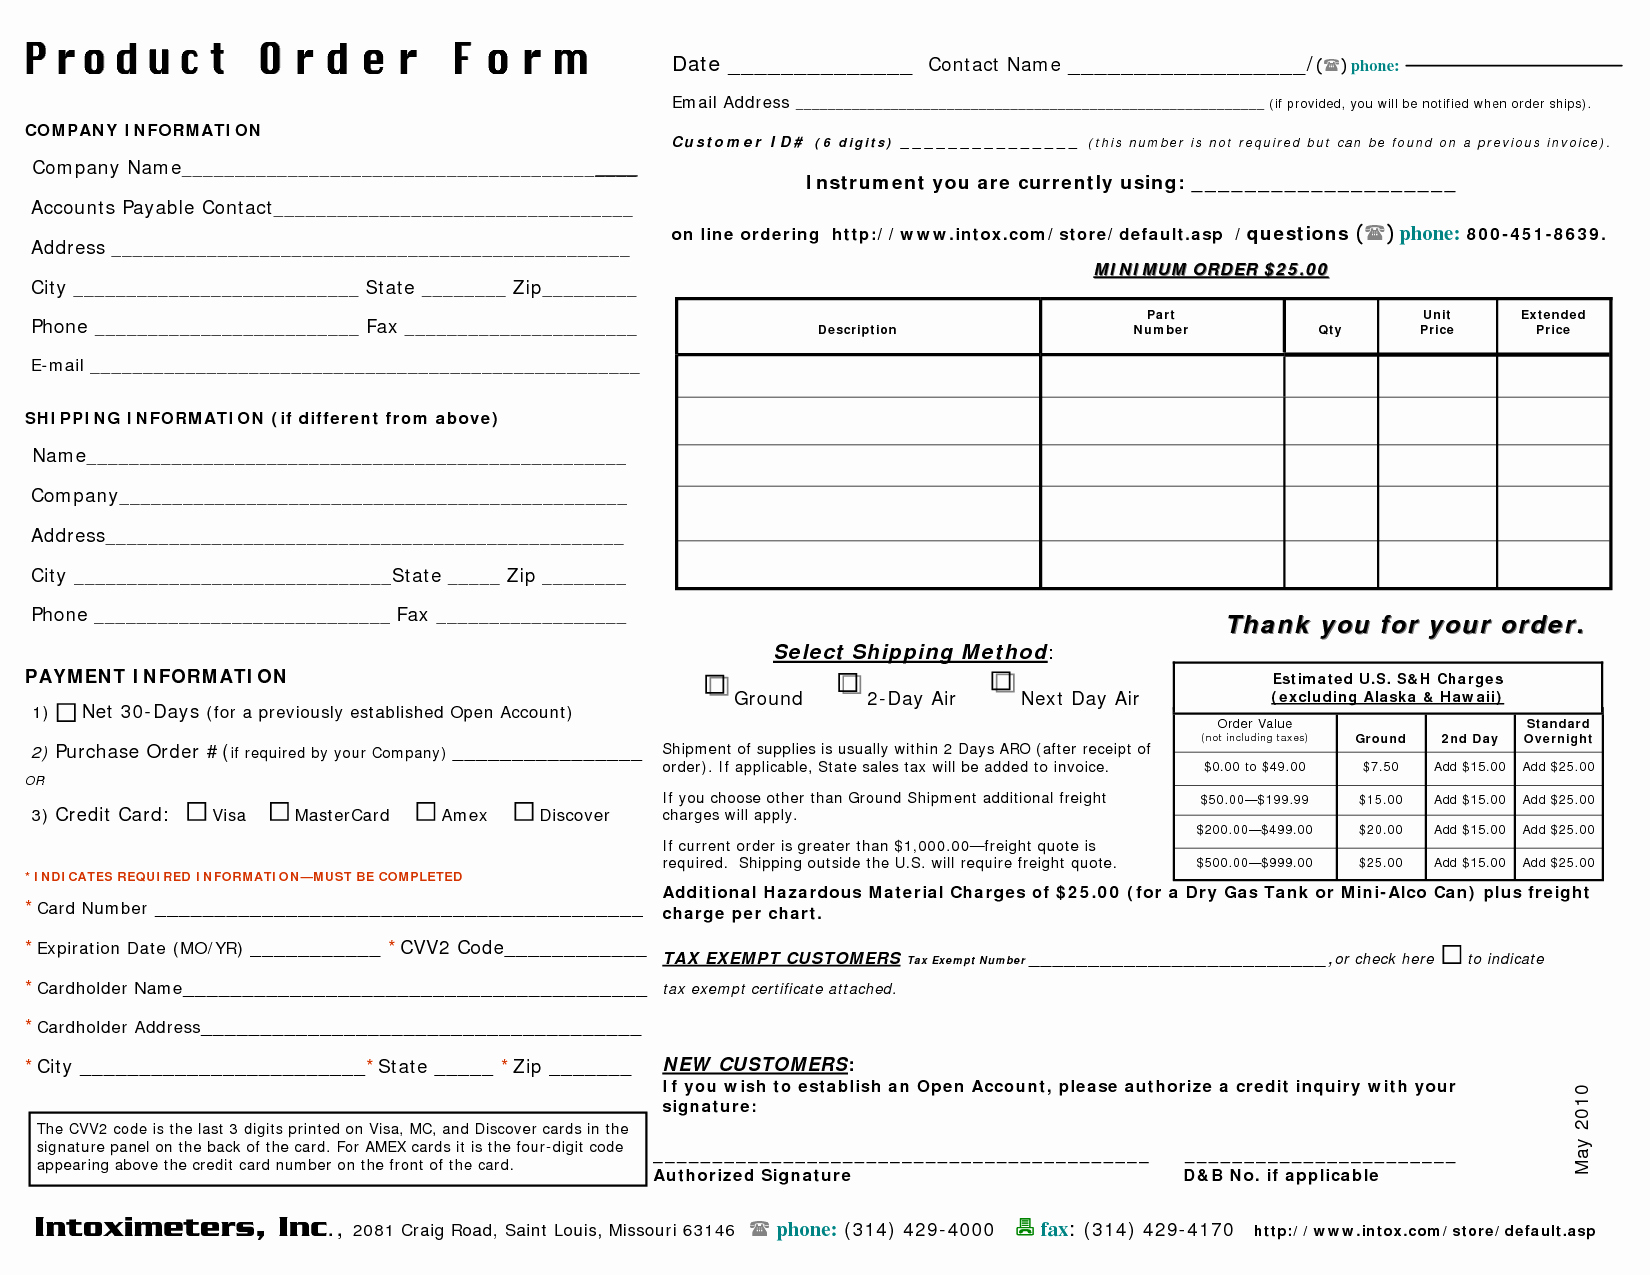 Pre order form Template Unique Best S Of Product order form Template wholesale